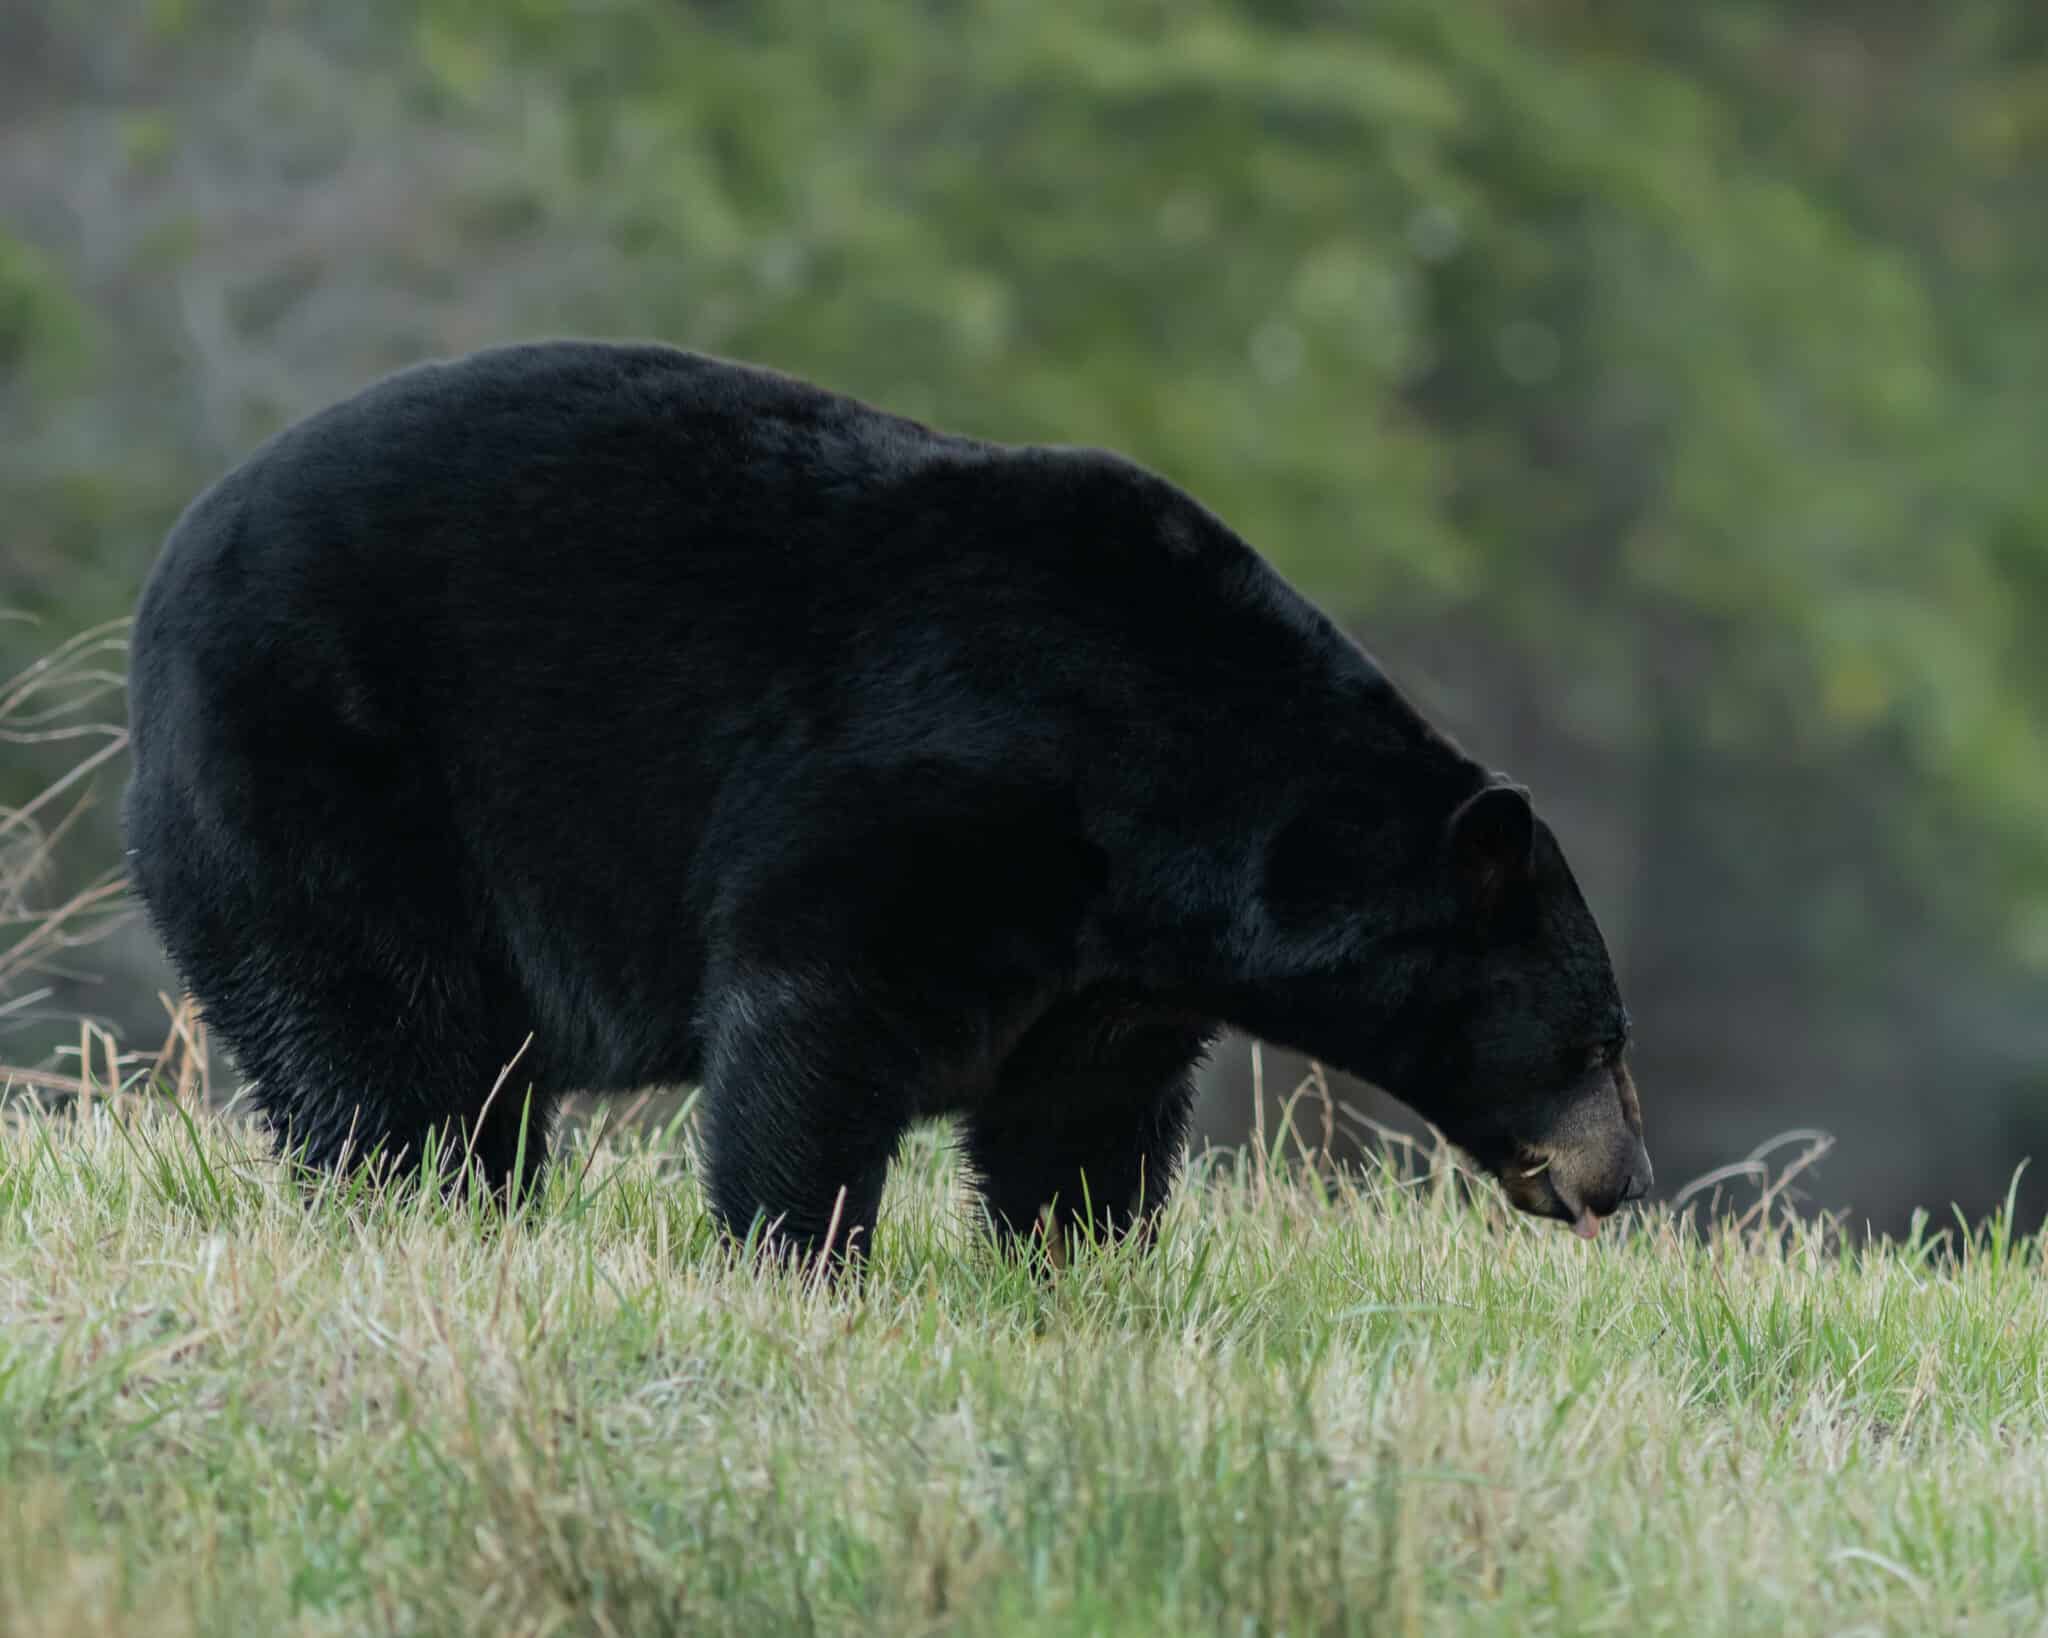 A black bear in the meadow eating a snack.